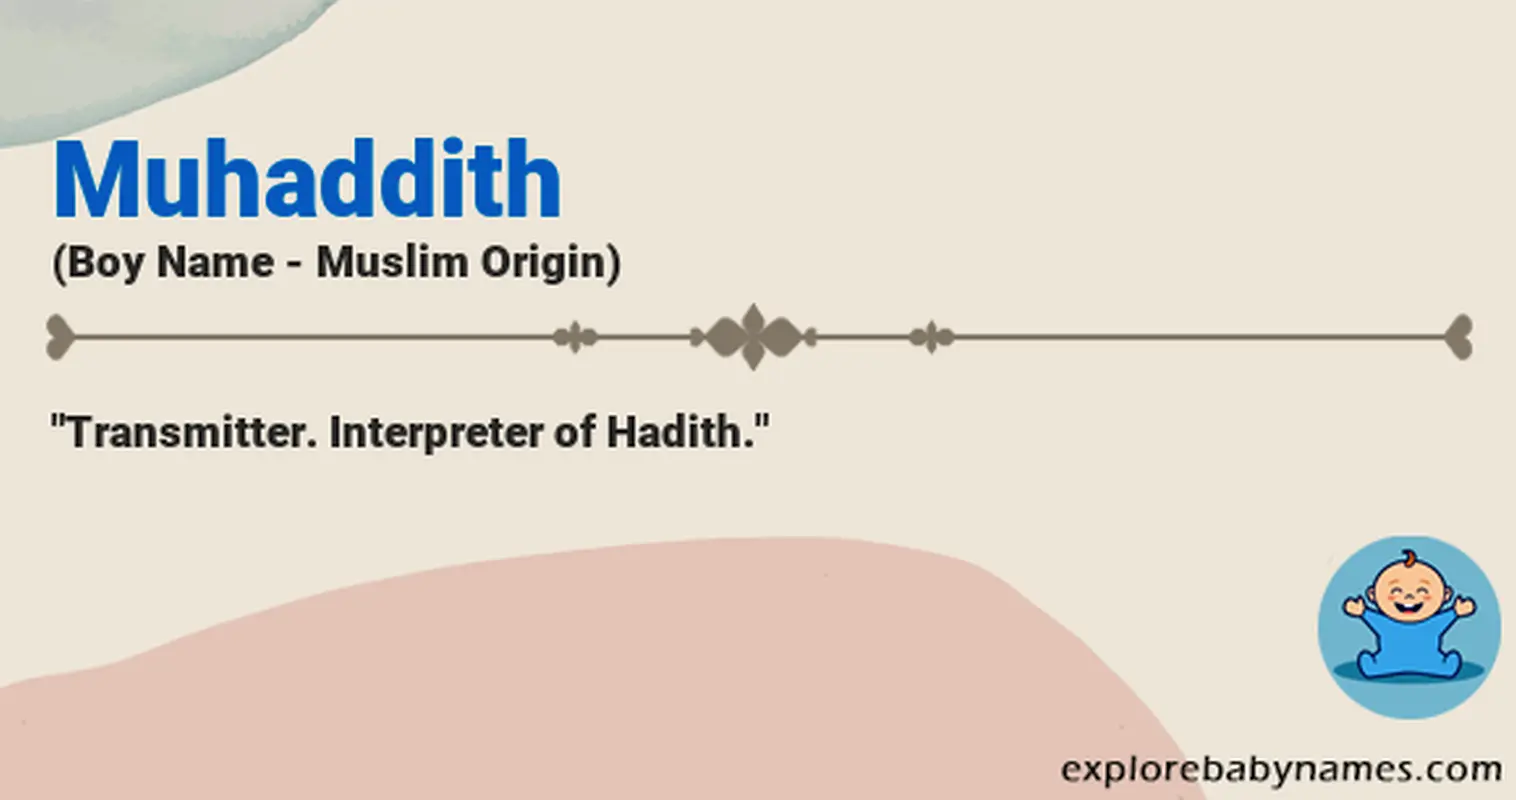 Meaning of Muhaddith